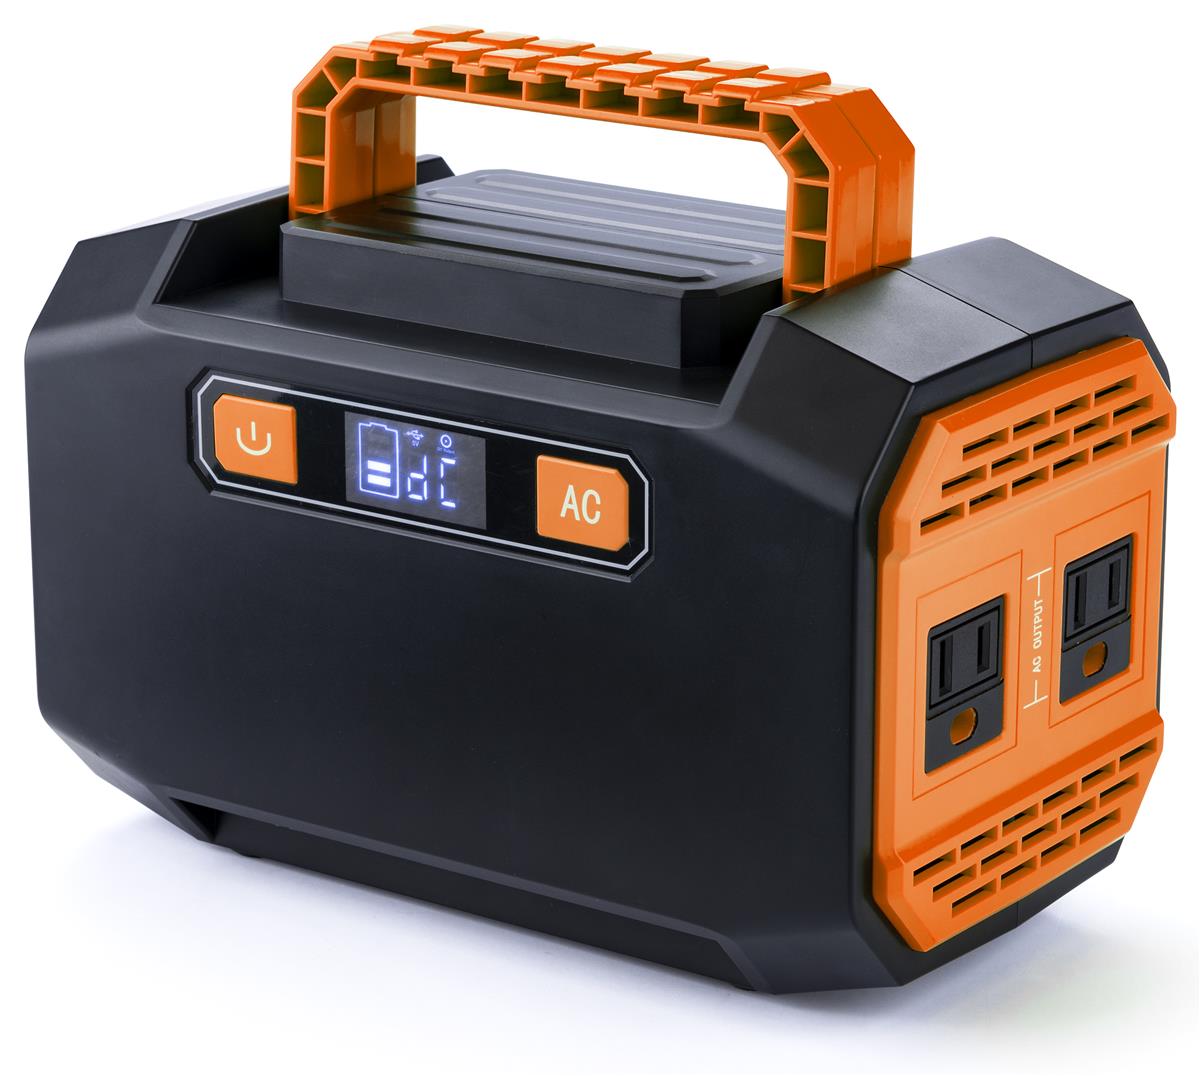 Portable battery. Portable Power Station. Power Battery pb6-7. Portable Power Station g 3000 на 80000 ампер цена. Portable Power Station g 3000 цена.